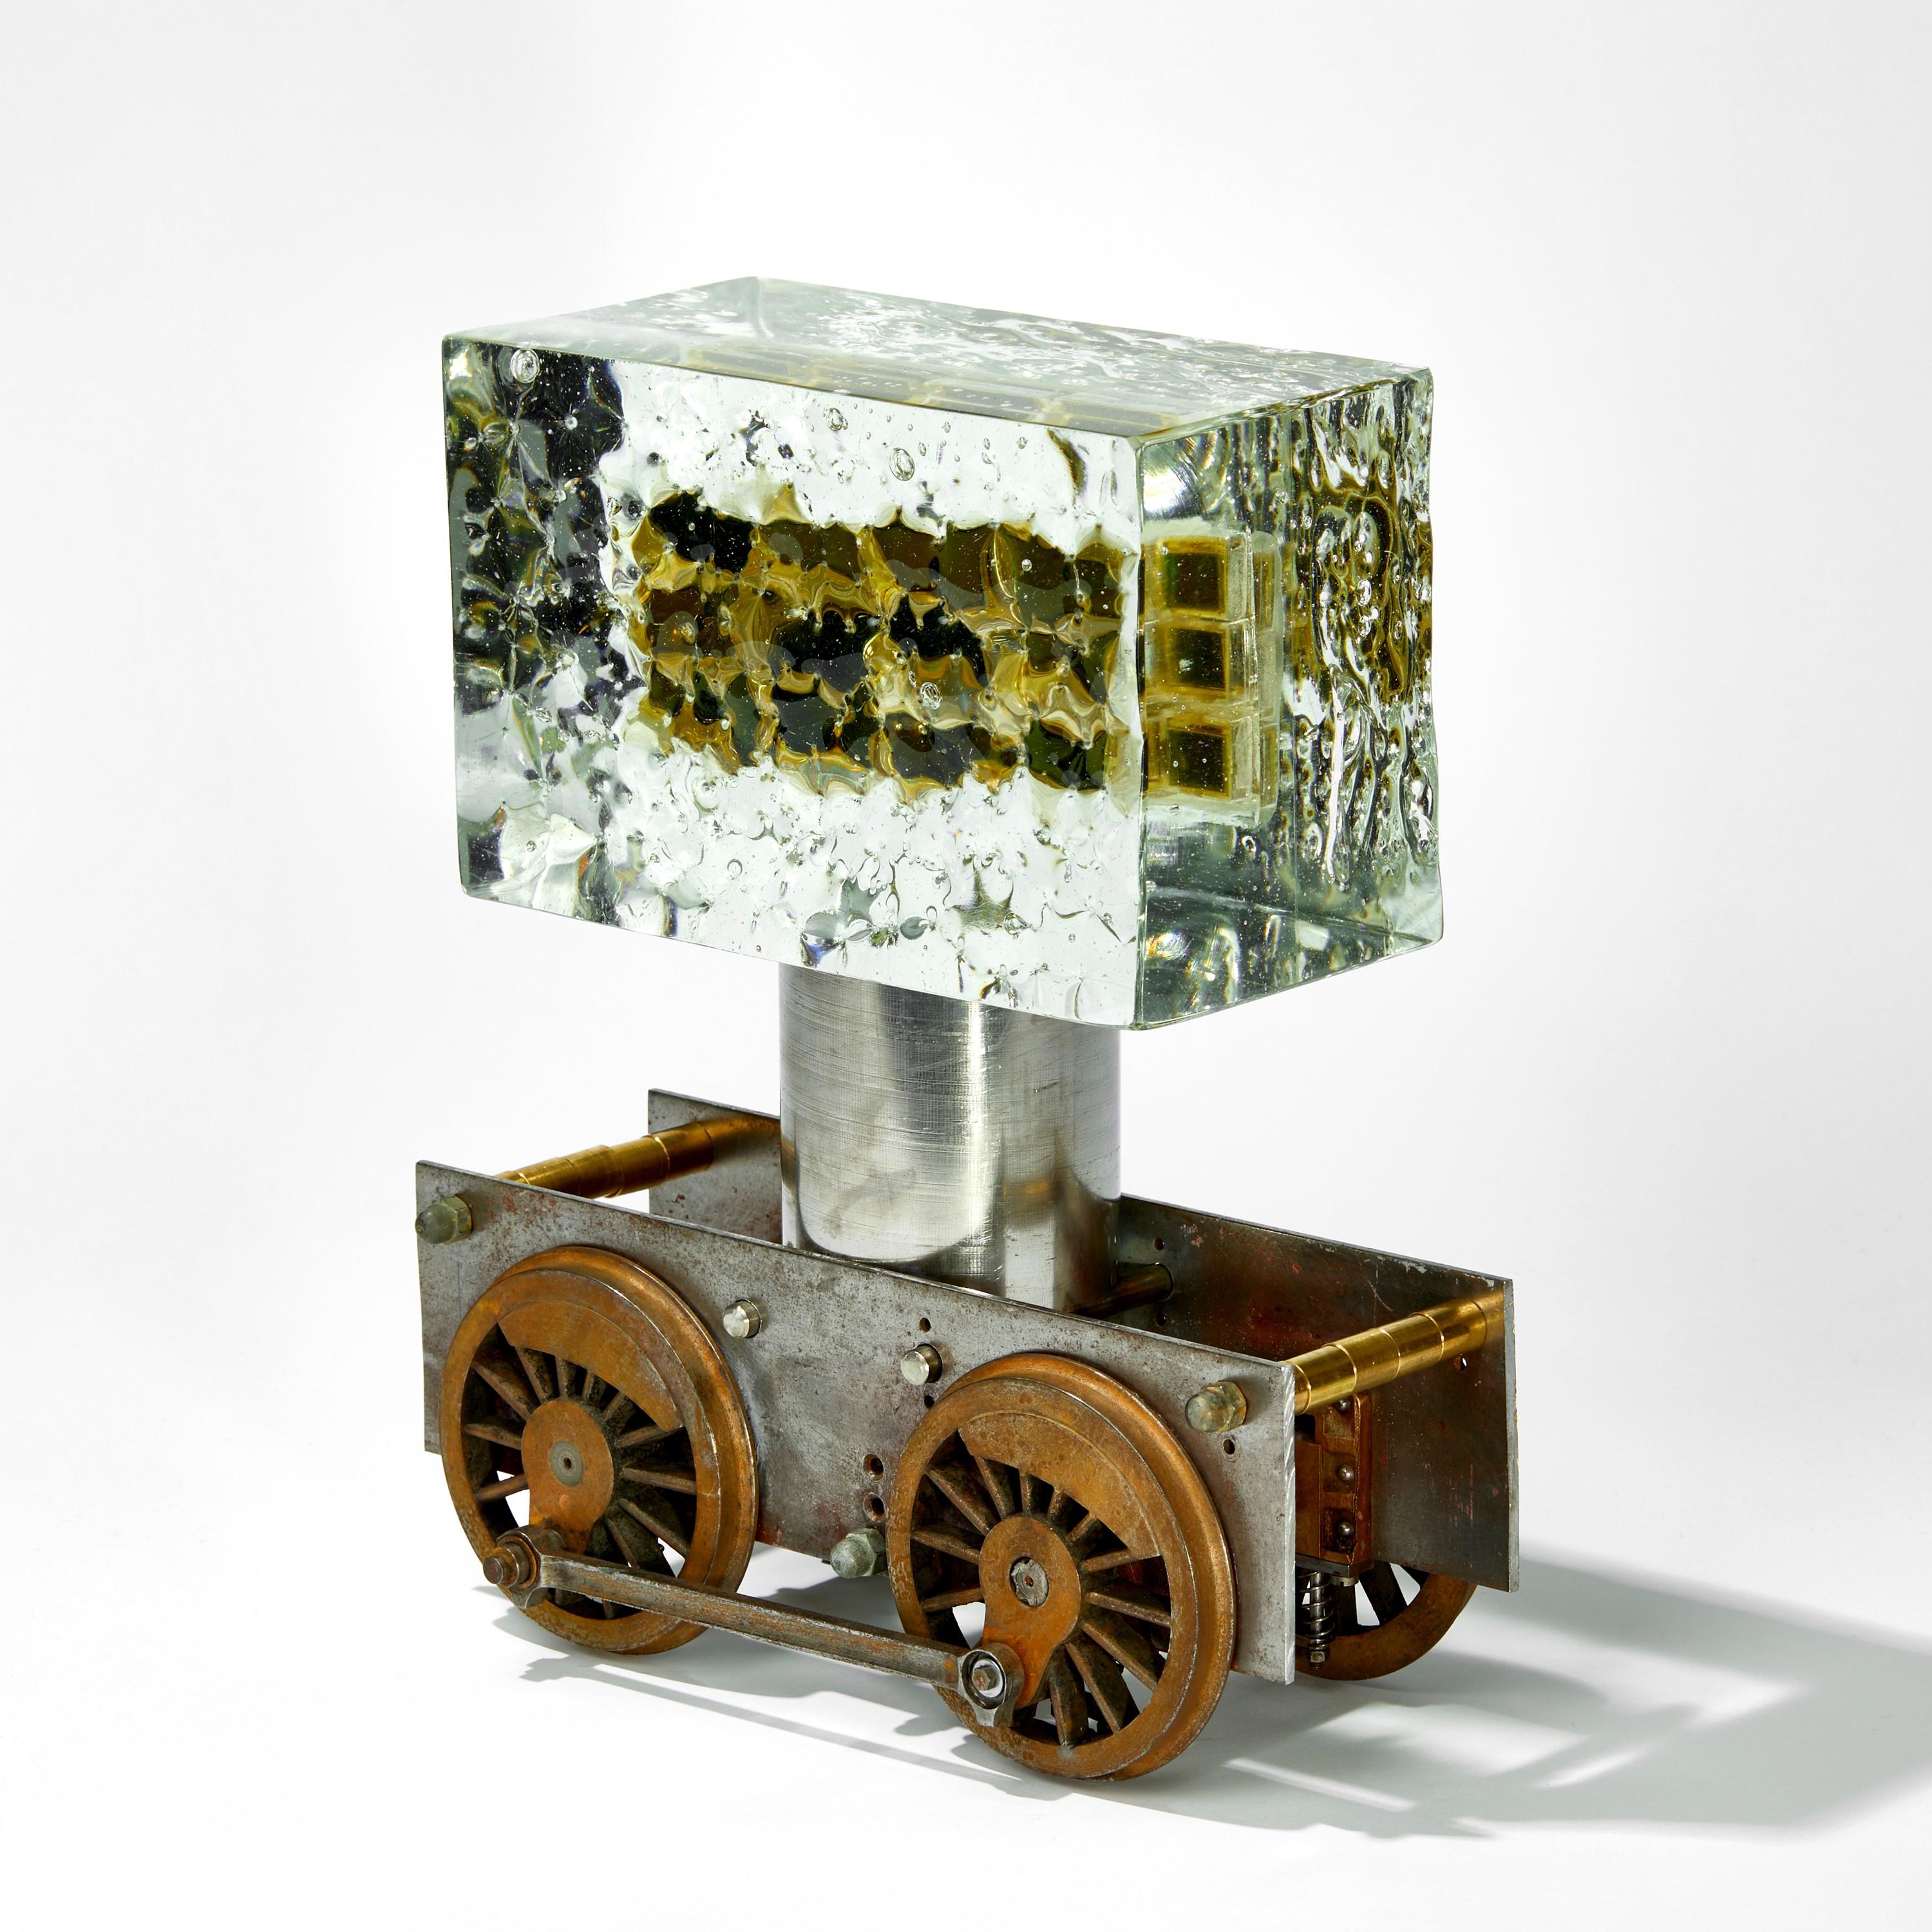 Organic Modern Chronos, an Aged Clear Glass and Steel Abstract Train Sculpture by Jon Lewis